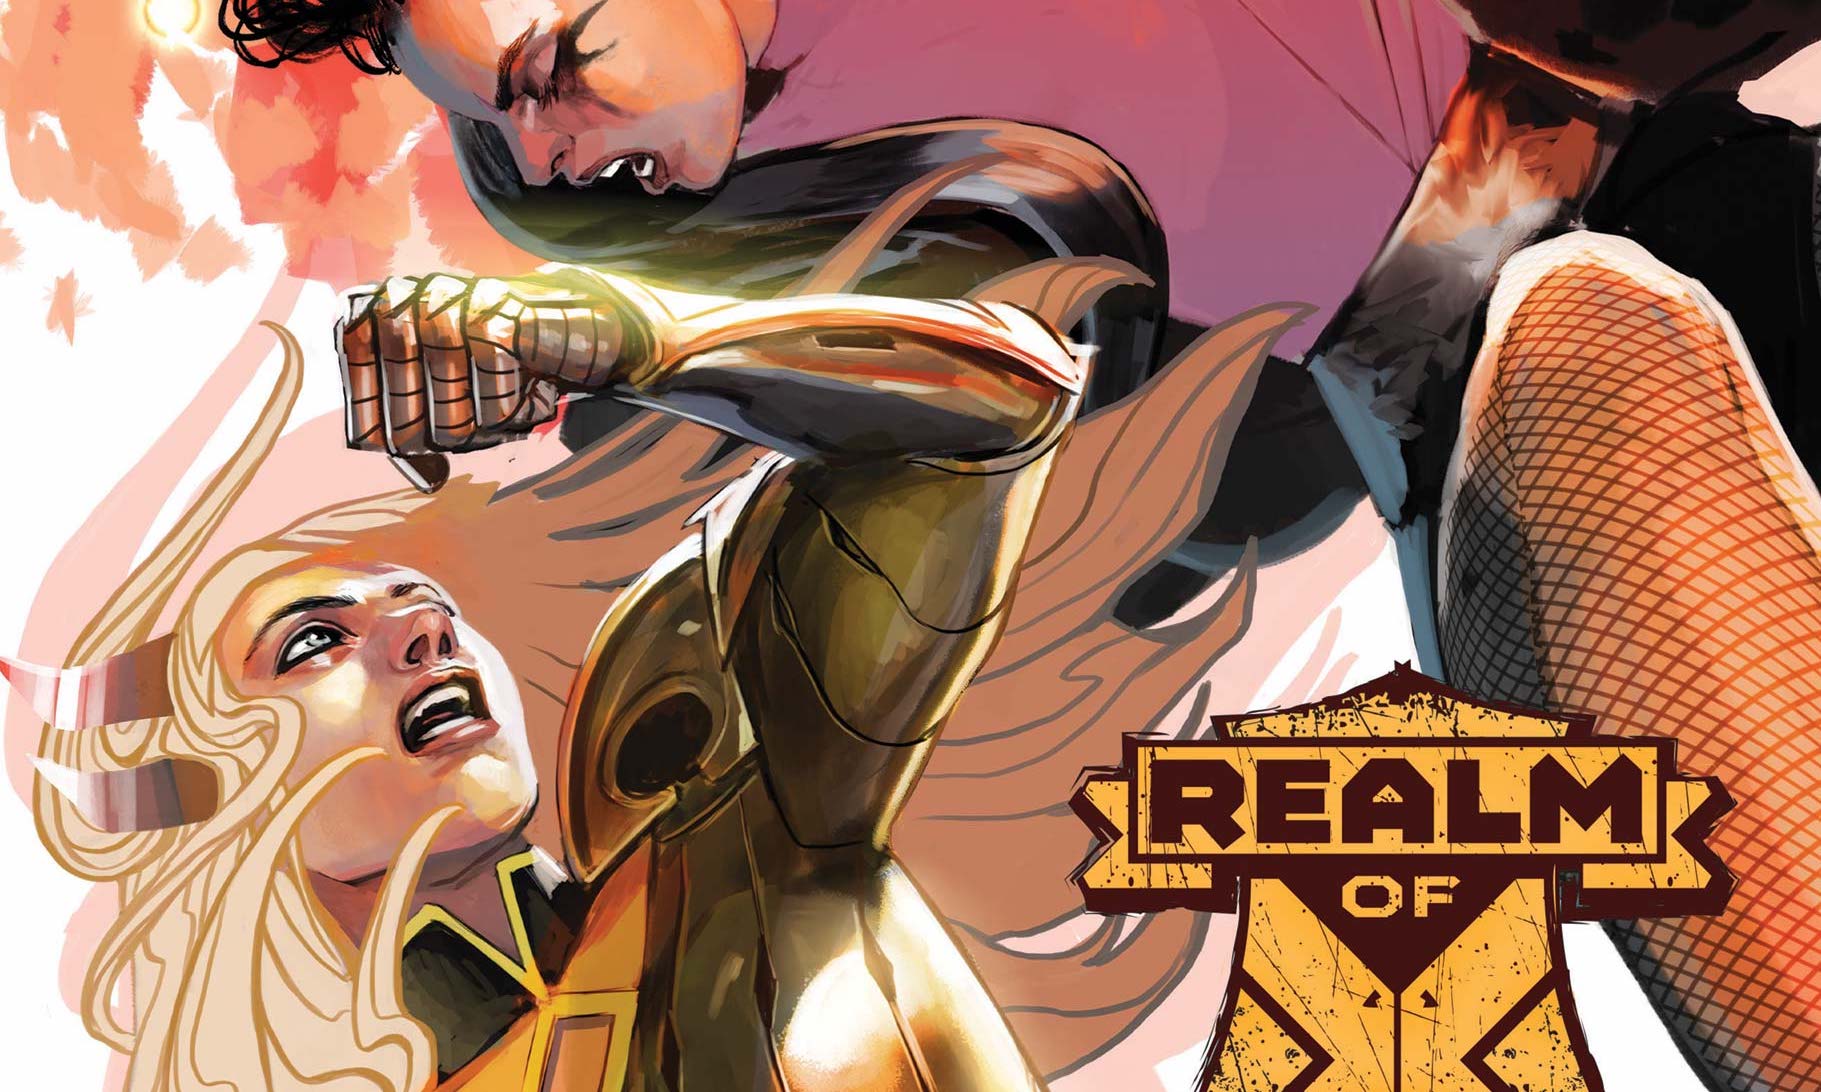 'Realm of X' #2 is a waiting game